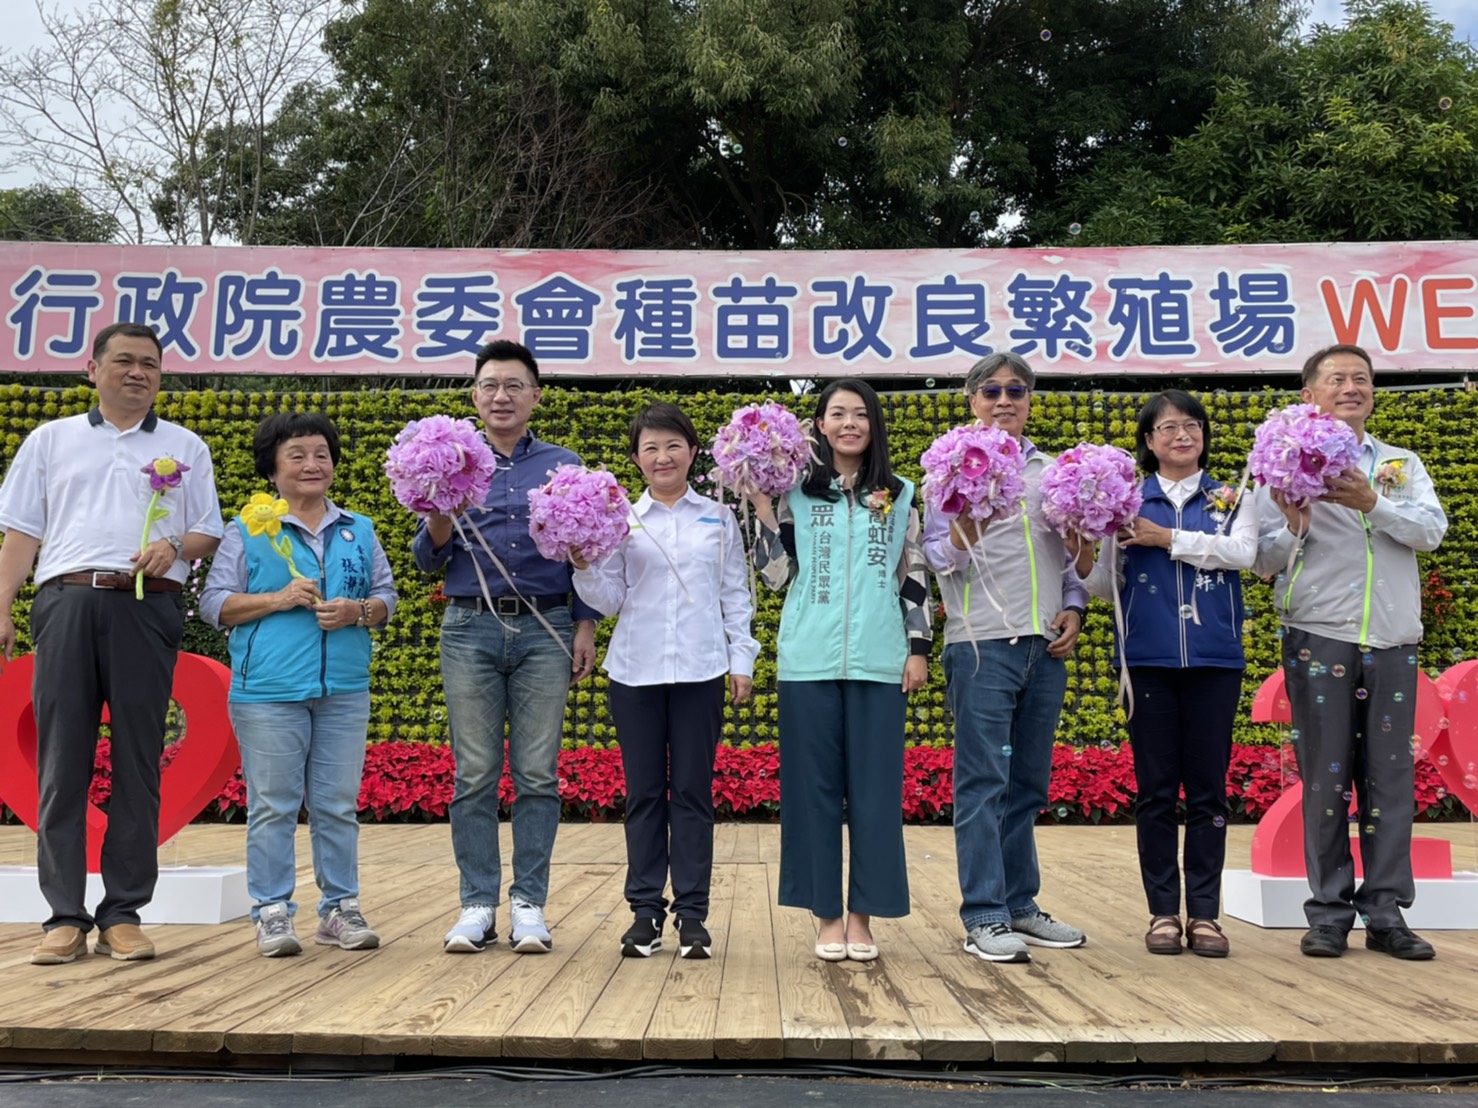 Honored guests hold bouquets of flowers in preparation for the opening ceremony.